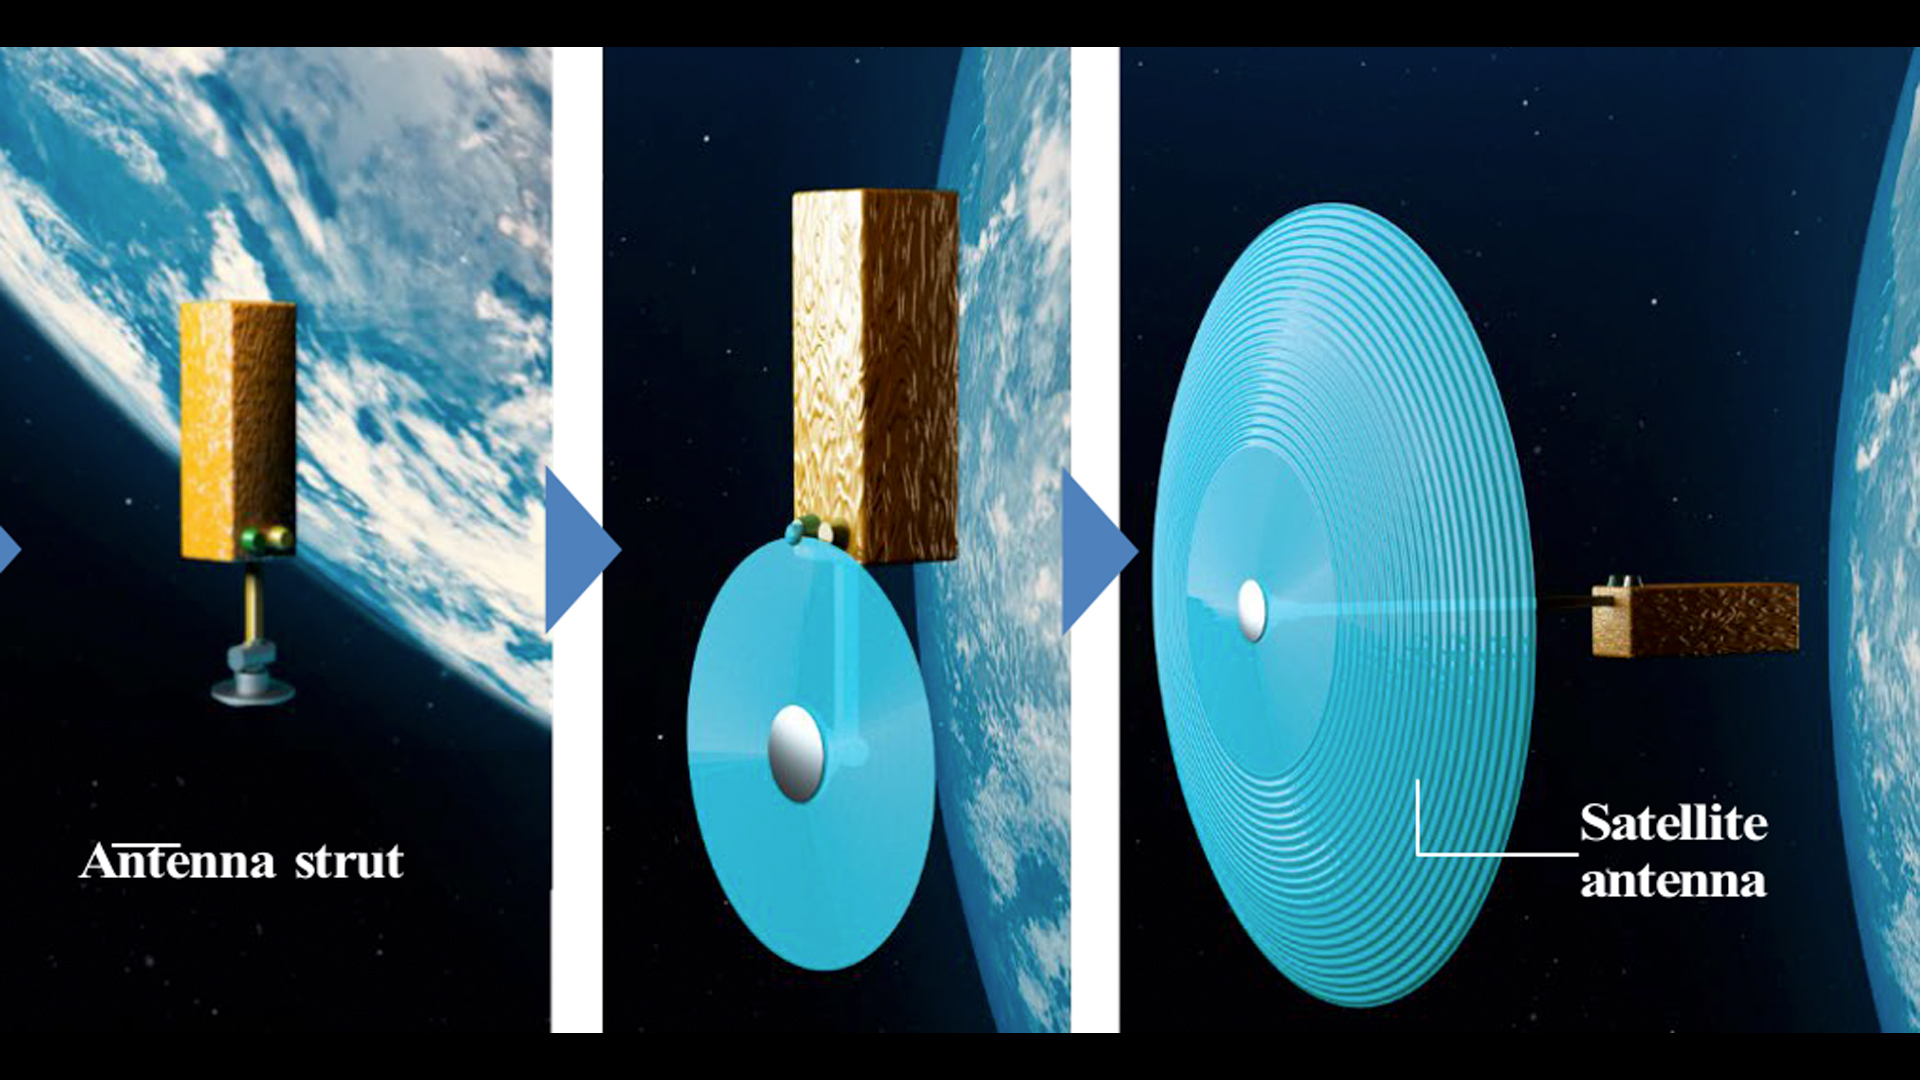 3D satellite antennas can be made in space with sunlight | Space